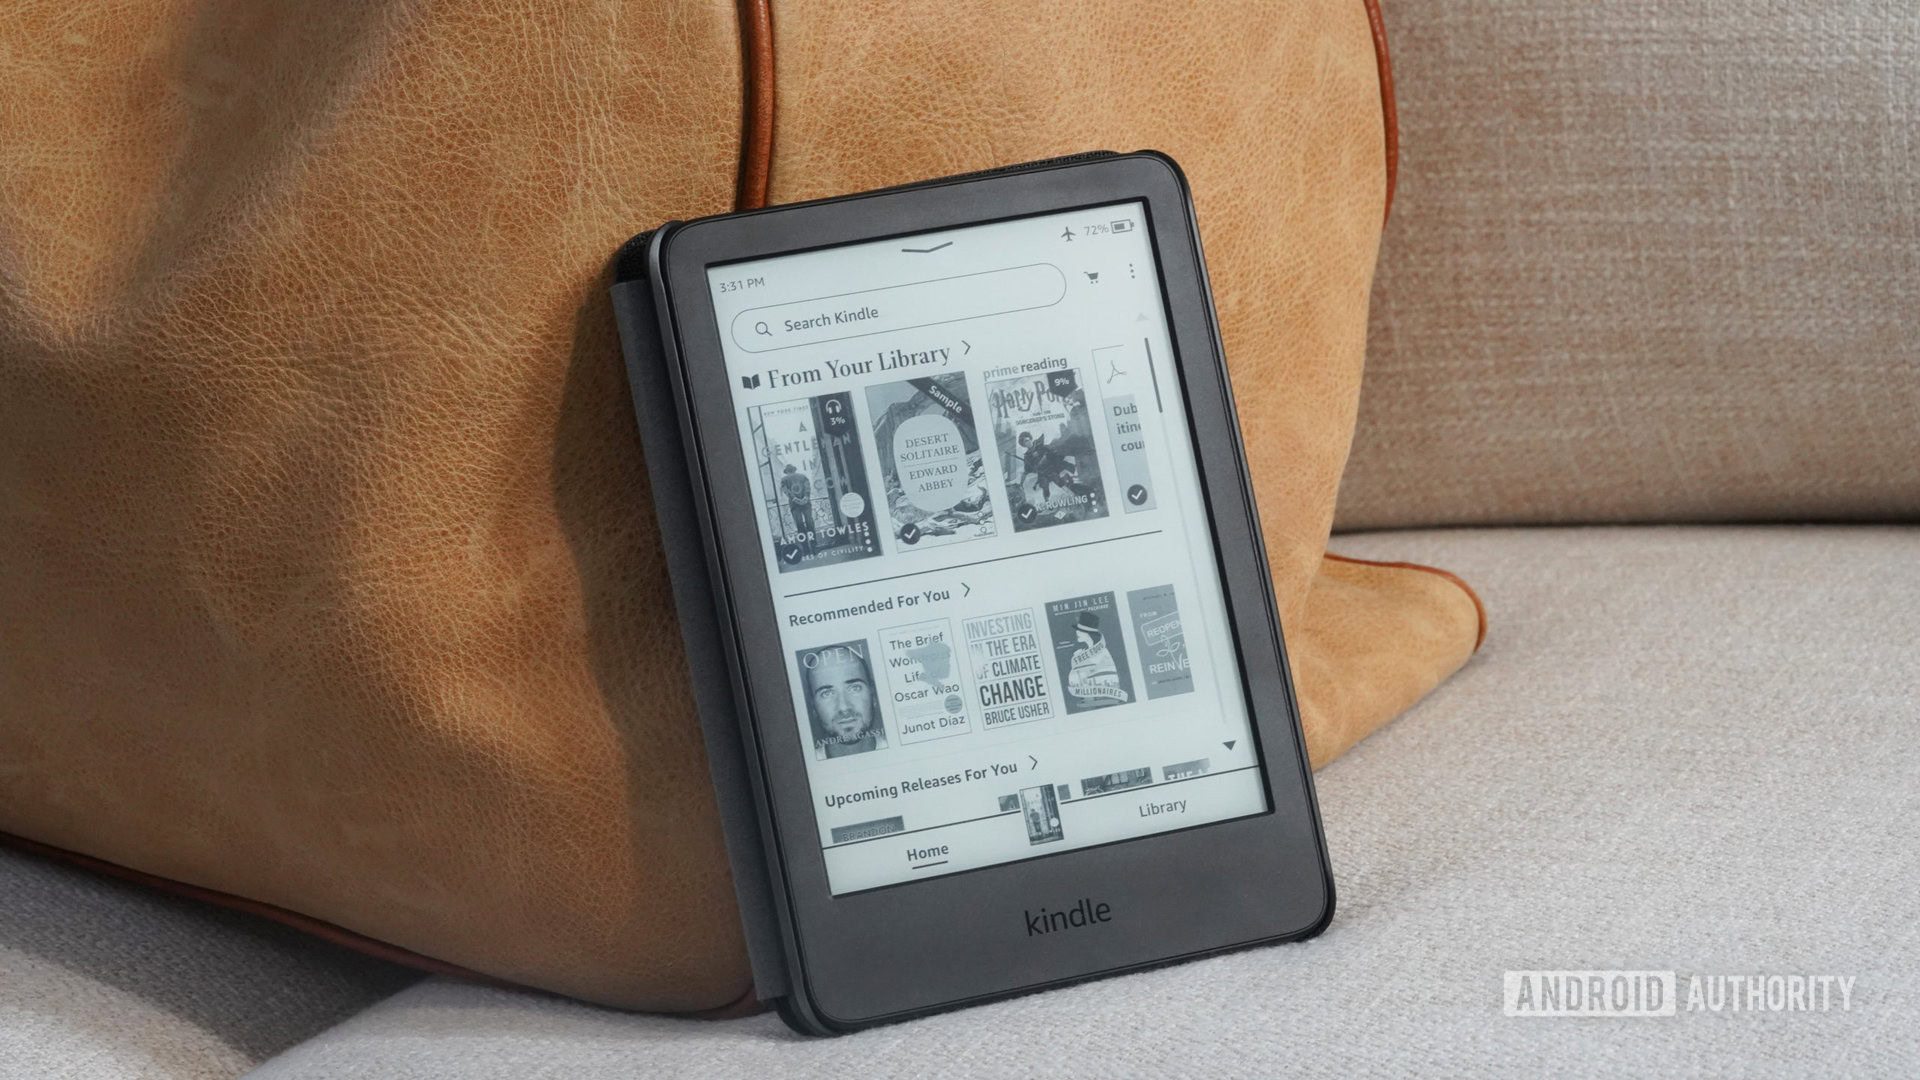 amazon kindle pc reader using chrome browser